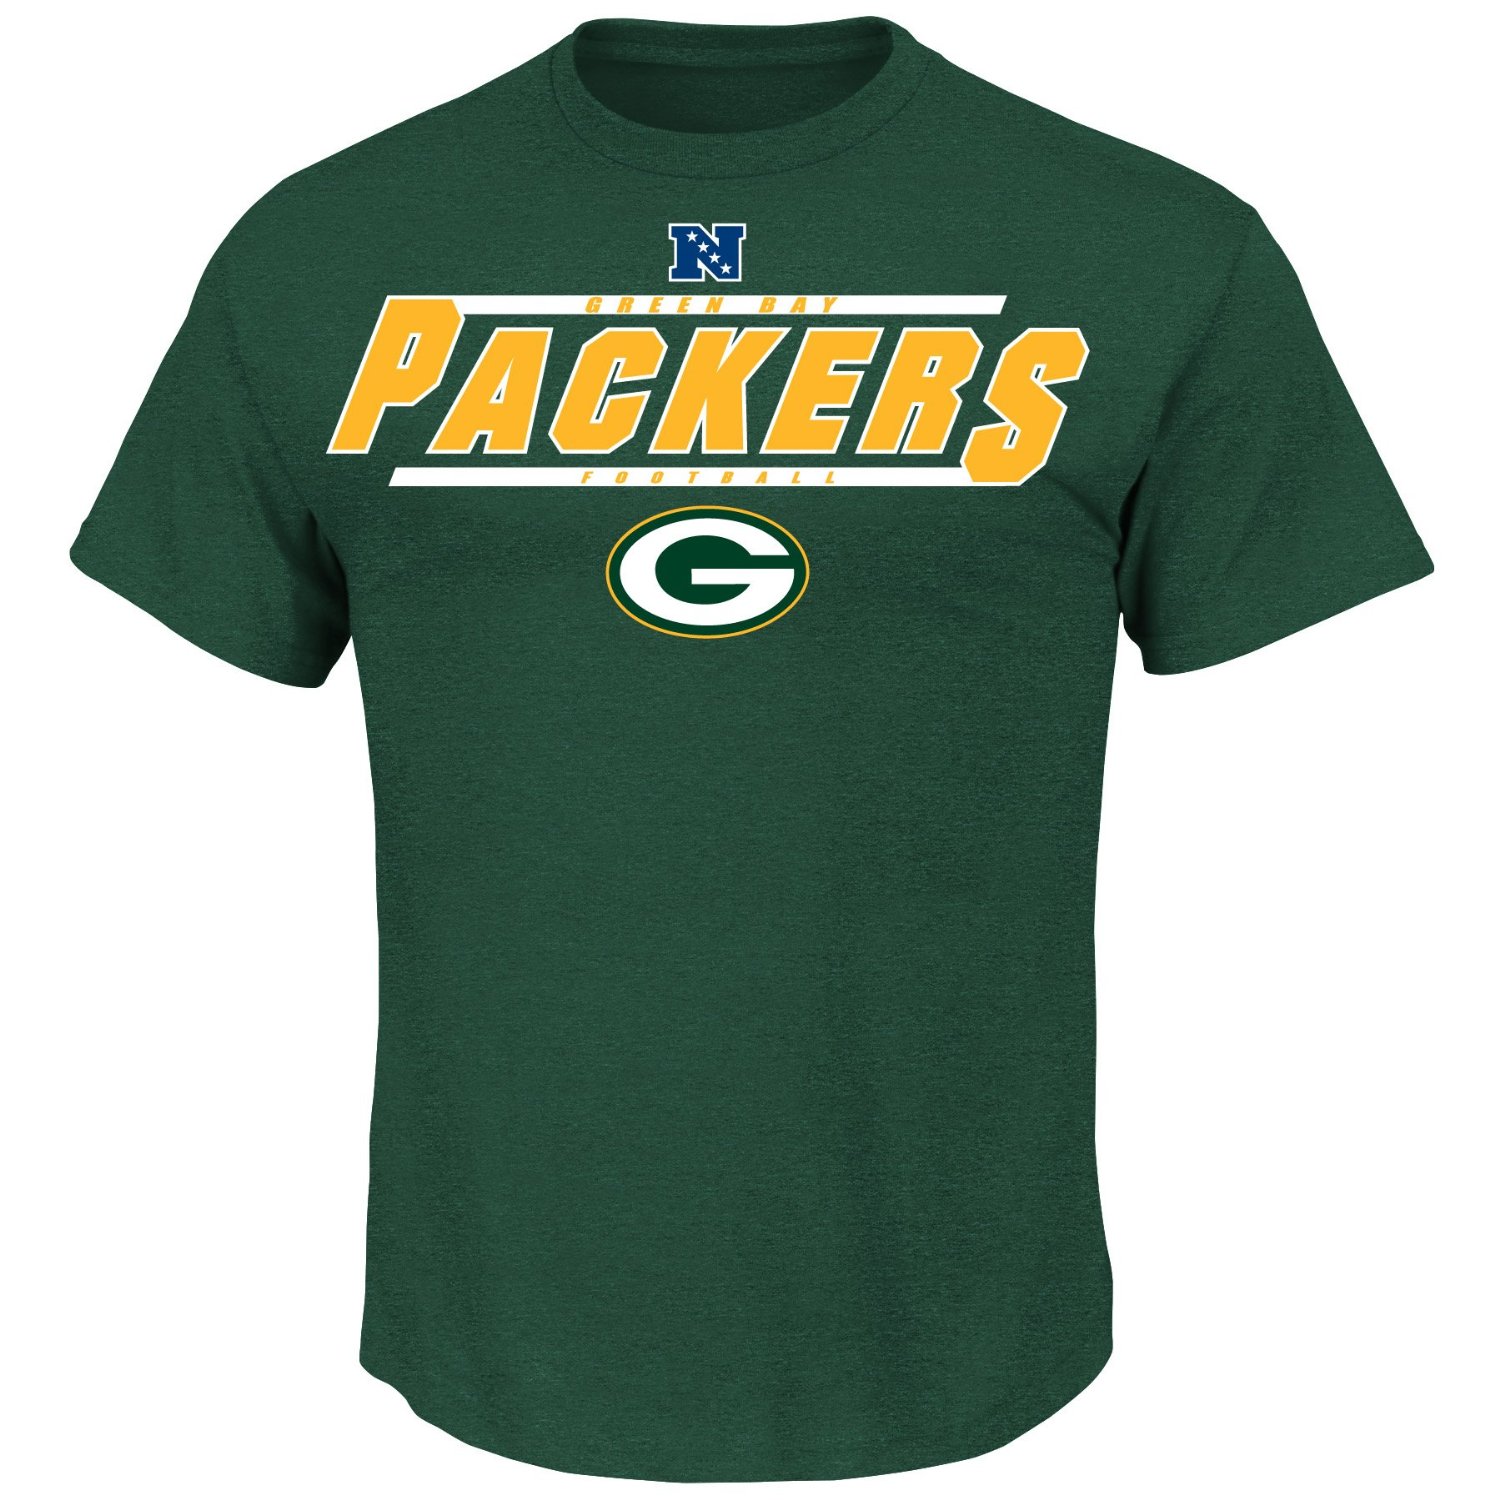 NFL Men's Short Sleeve T-Shirts (Various Designs and Teams) from $6.06 ...